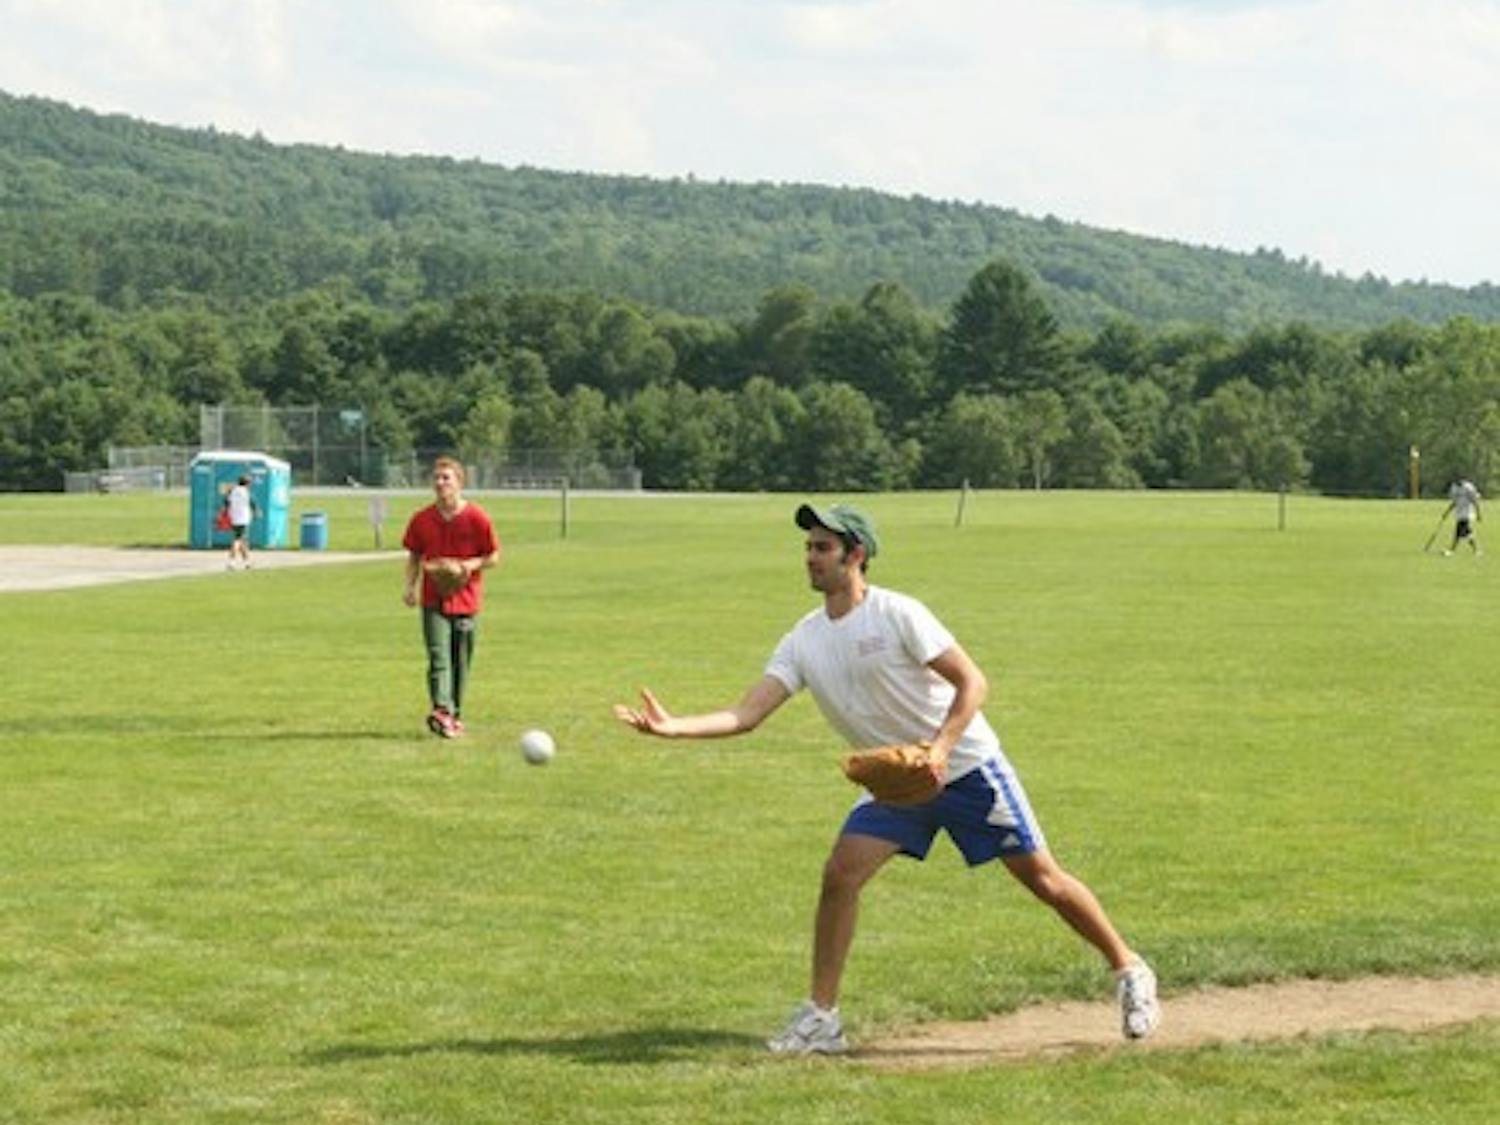 Bret Tenenhaus '09, Captain of the Sig Ep softball team, serves up a pitch to his teammates. Sig Ep (5-0) earned the first seed in next week's playoffs.